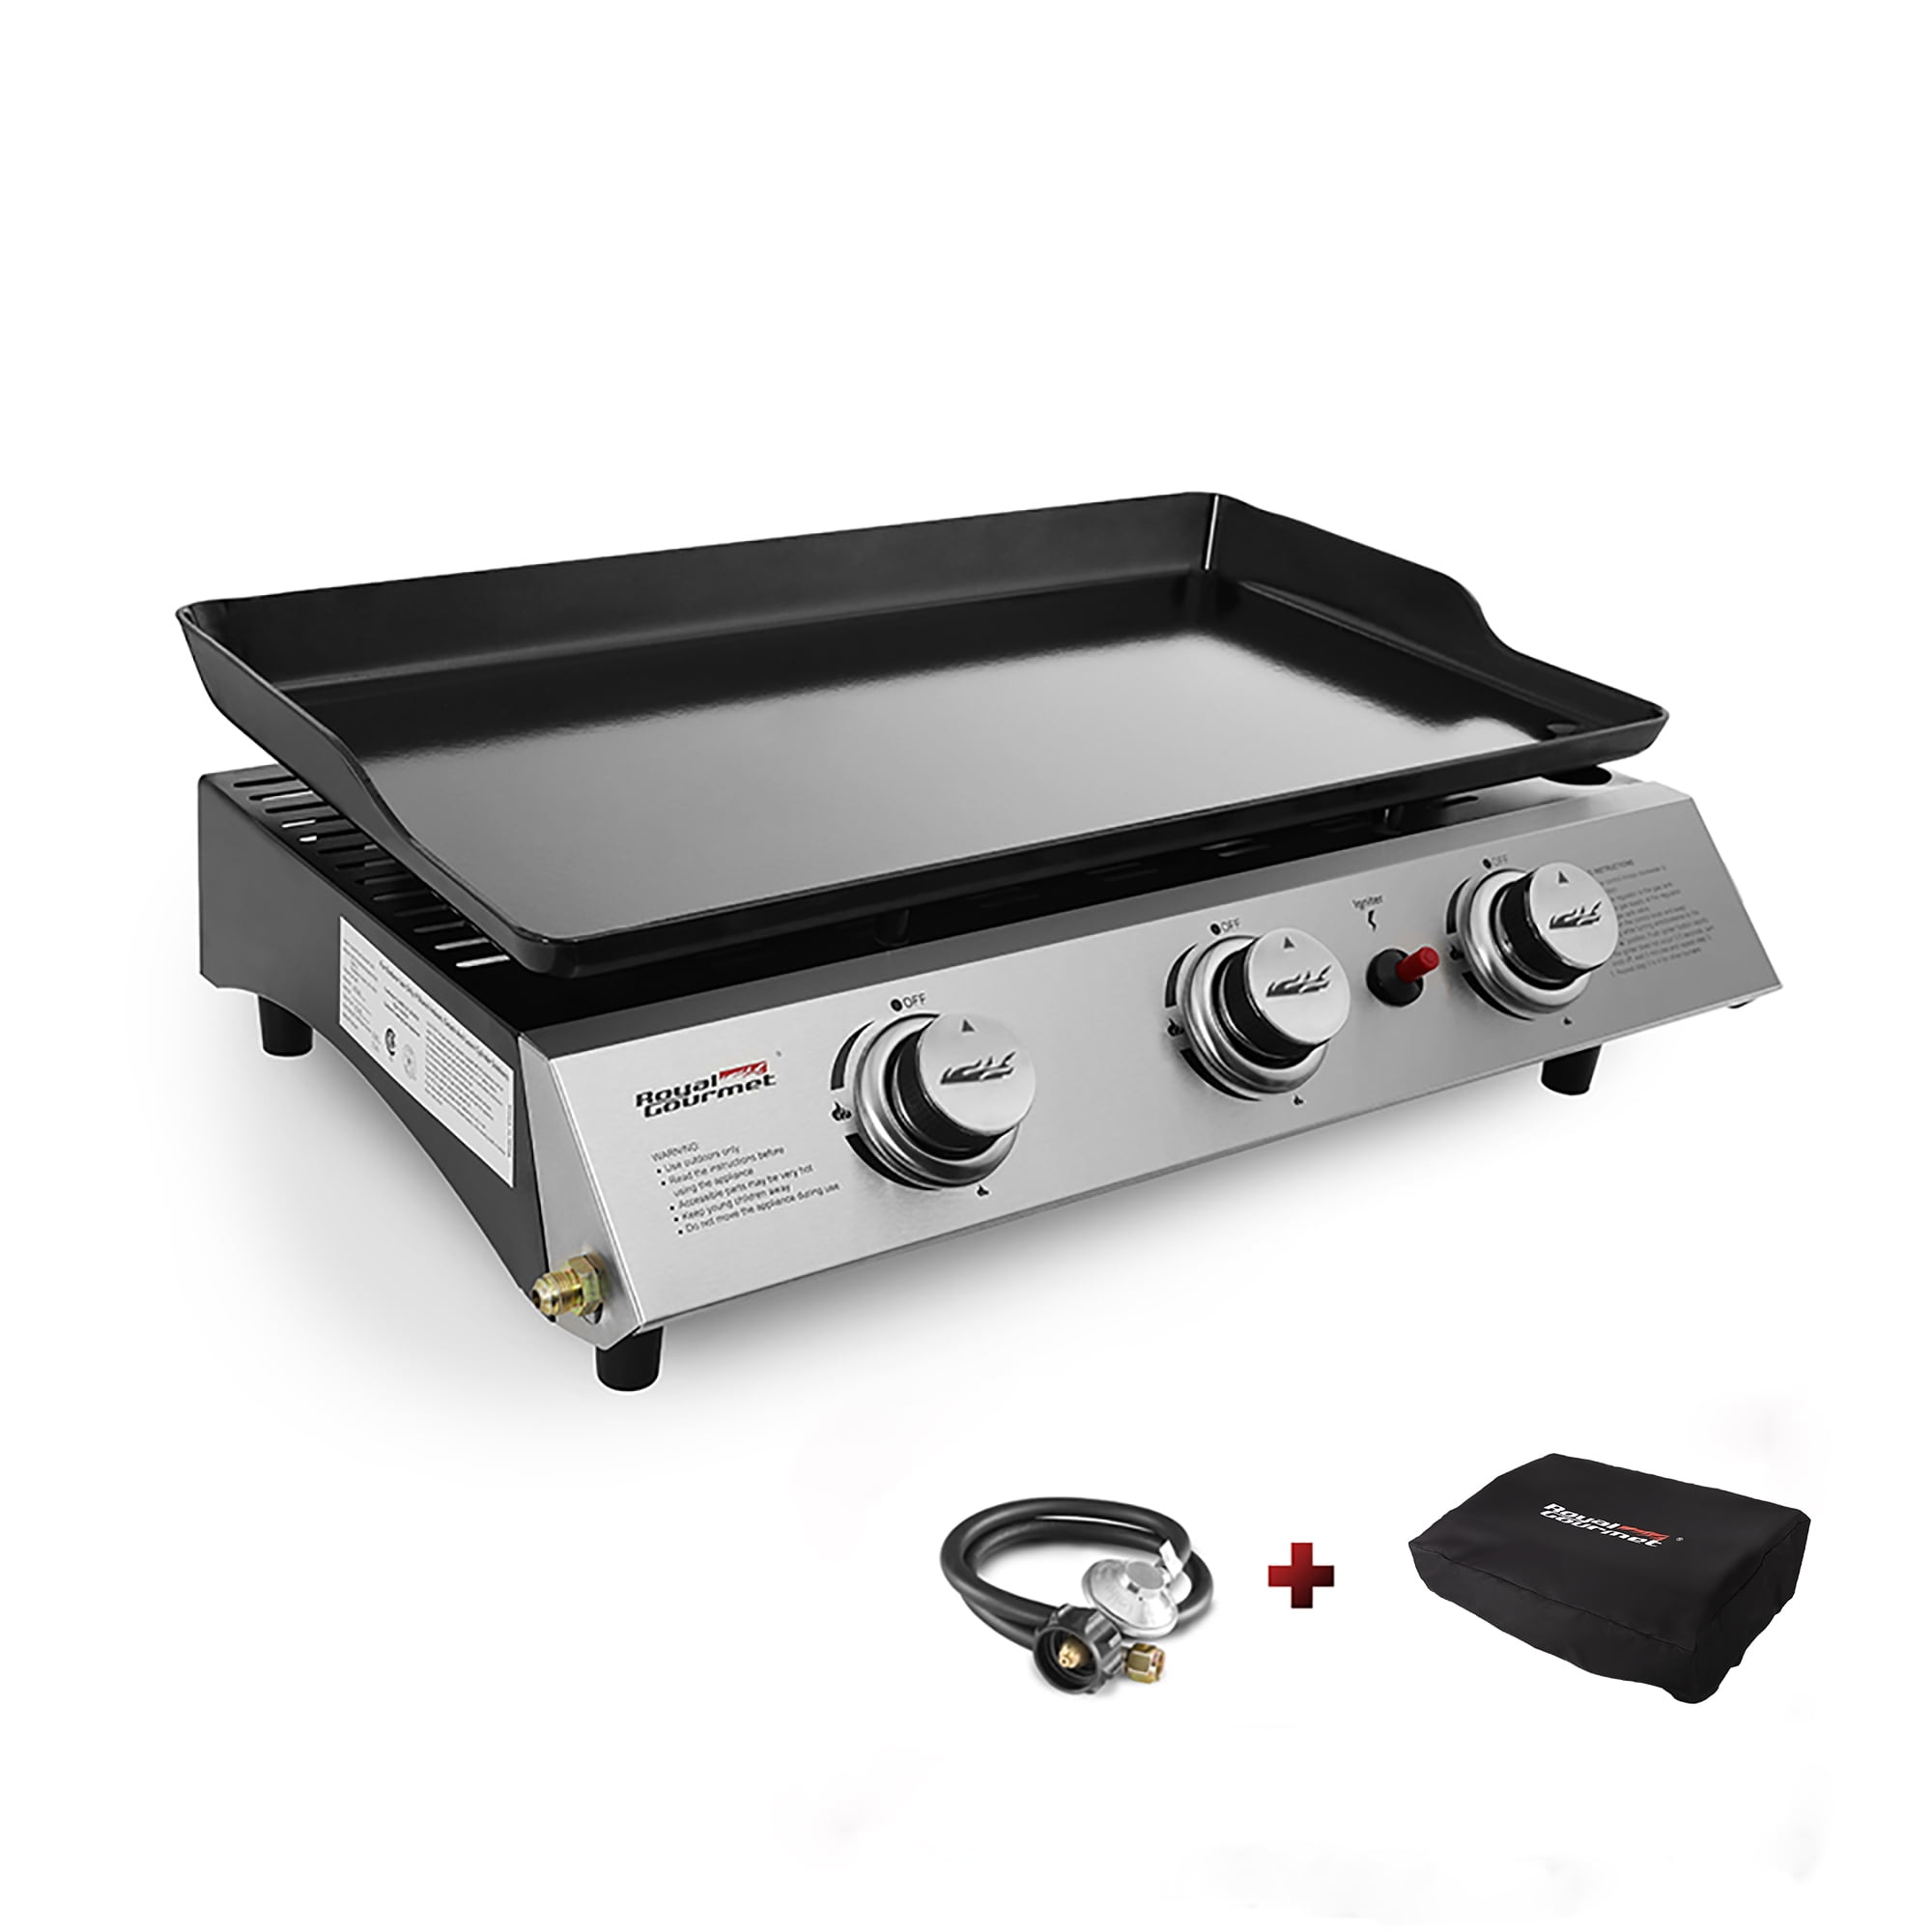 Royal Gourmet PD1203A 2 Burner Portable Griddle 18inch Tabletop Gas Grill Tailgate Black 